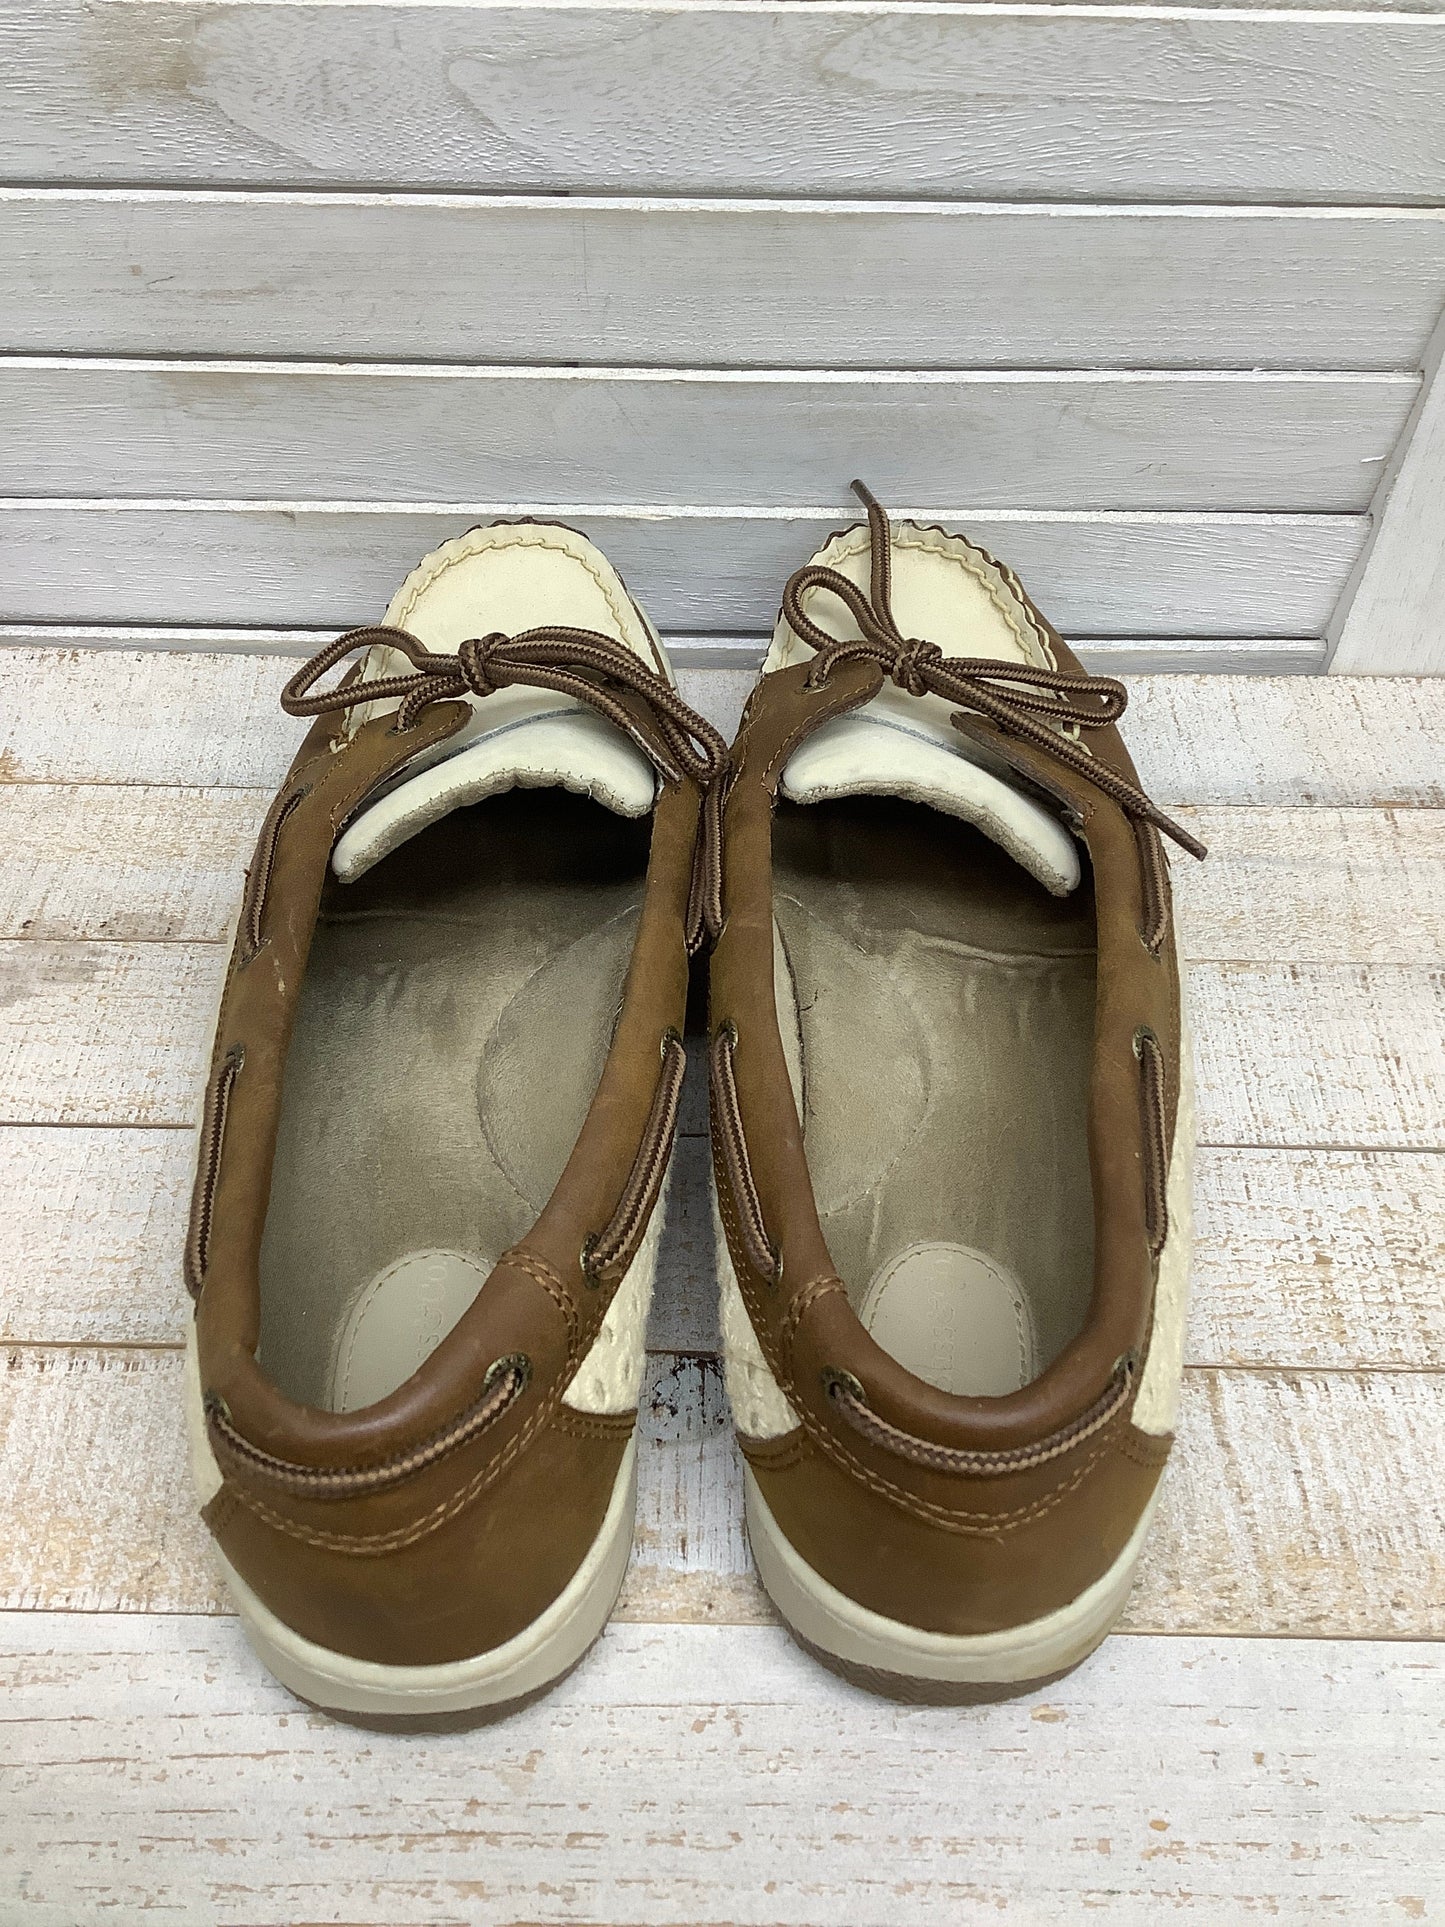 Shoes Flats Boat By Gh Bass And Co  Size: 9.5